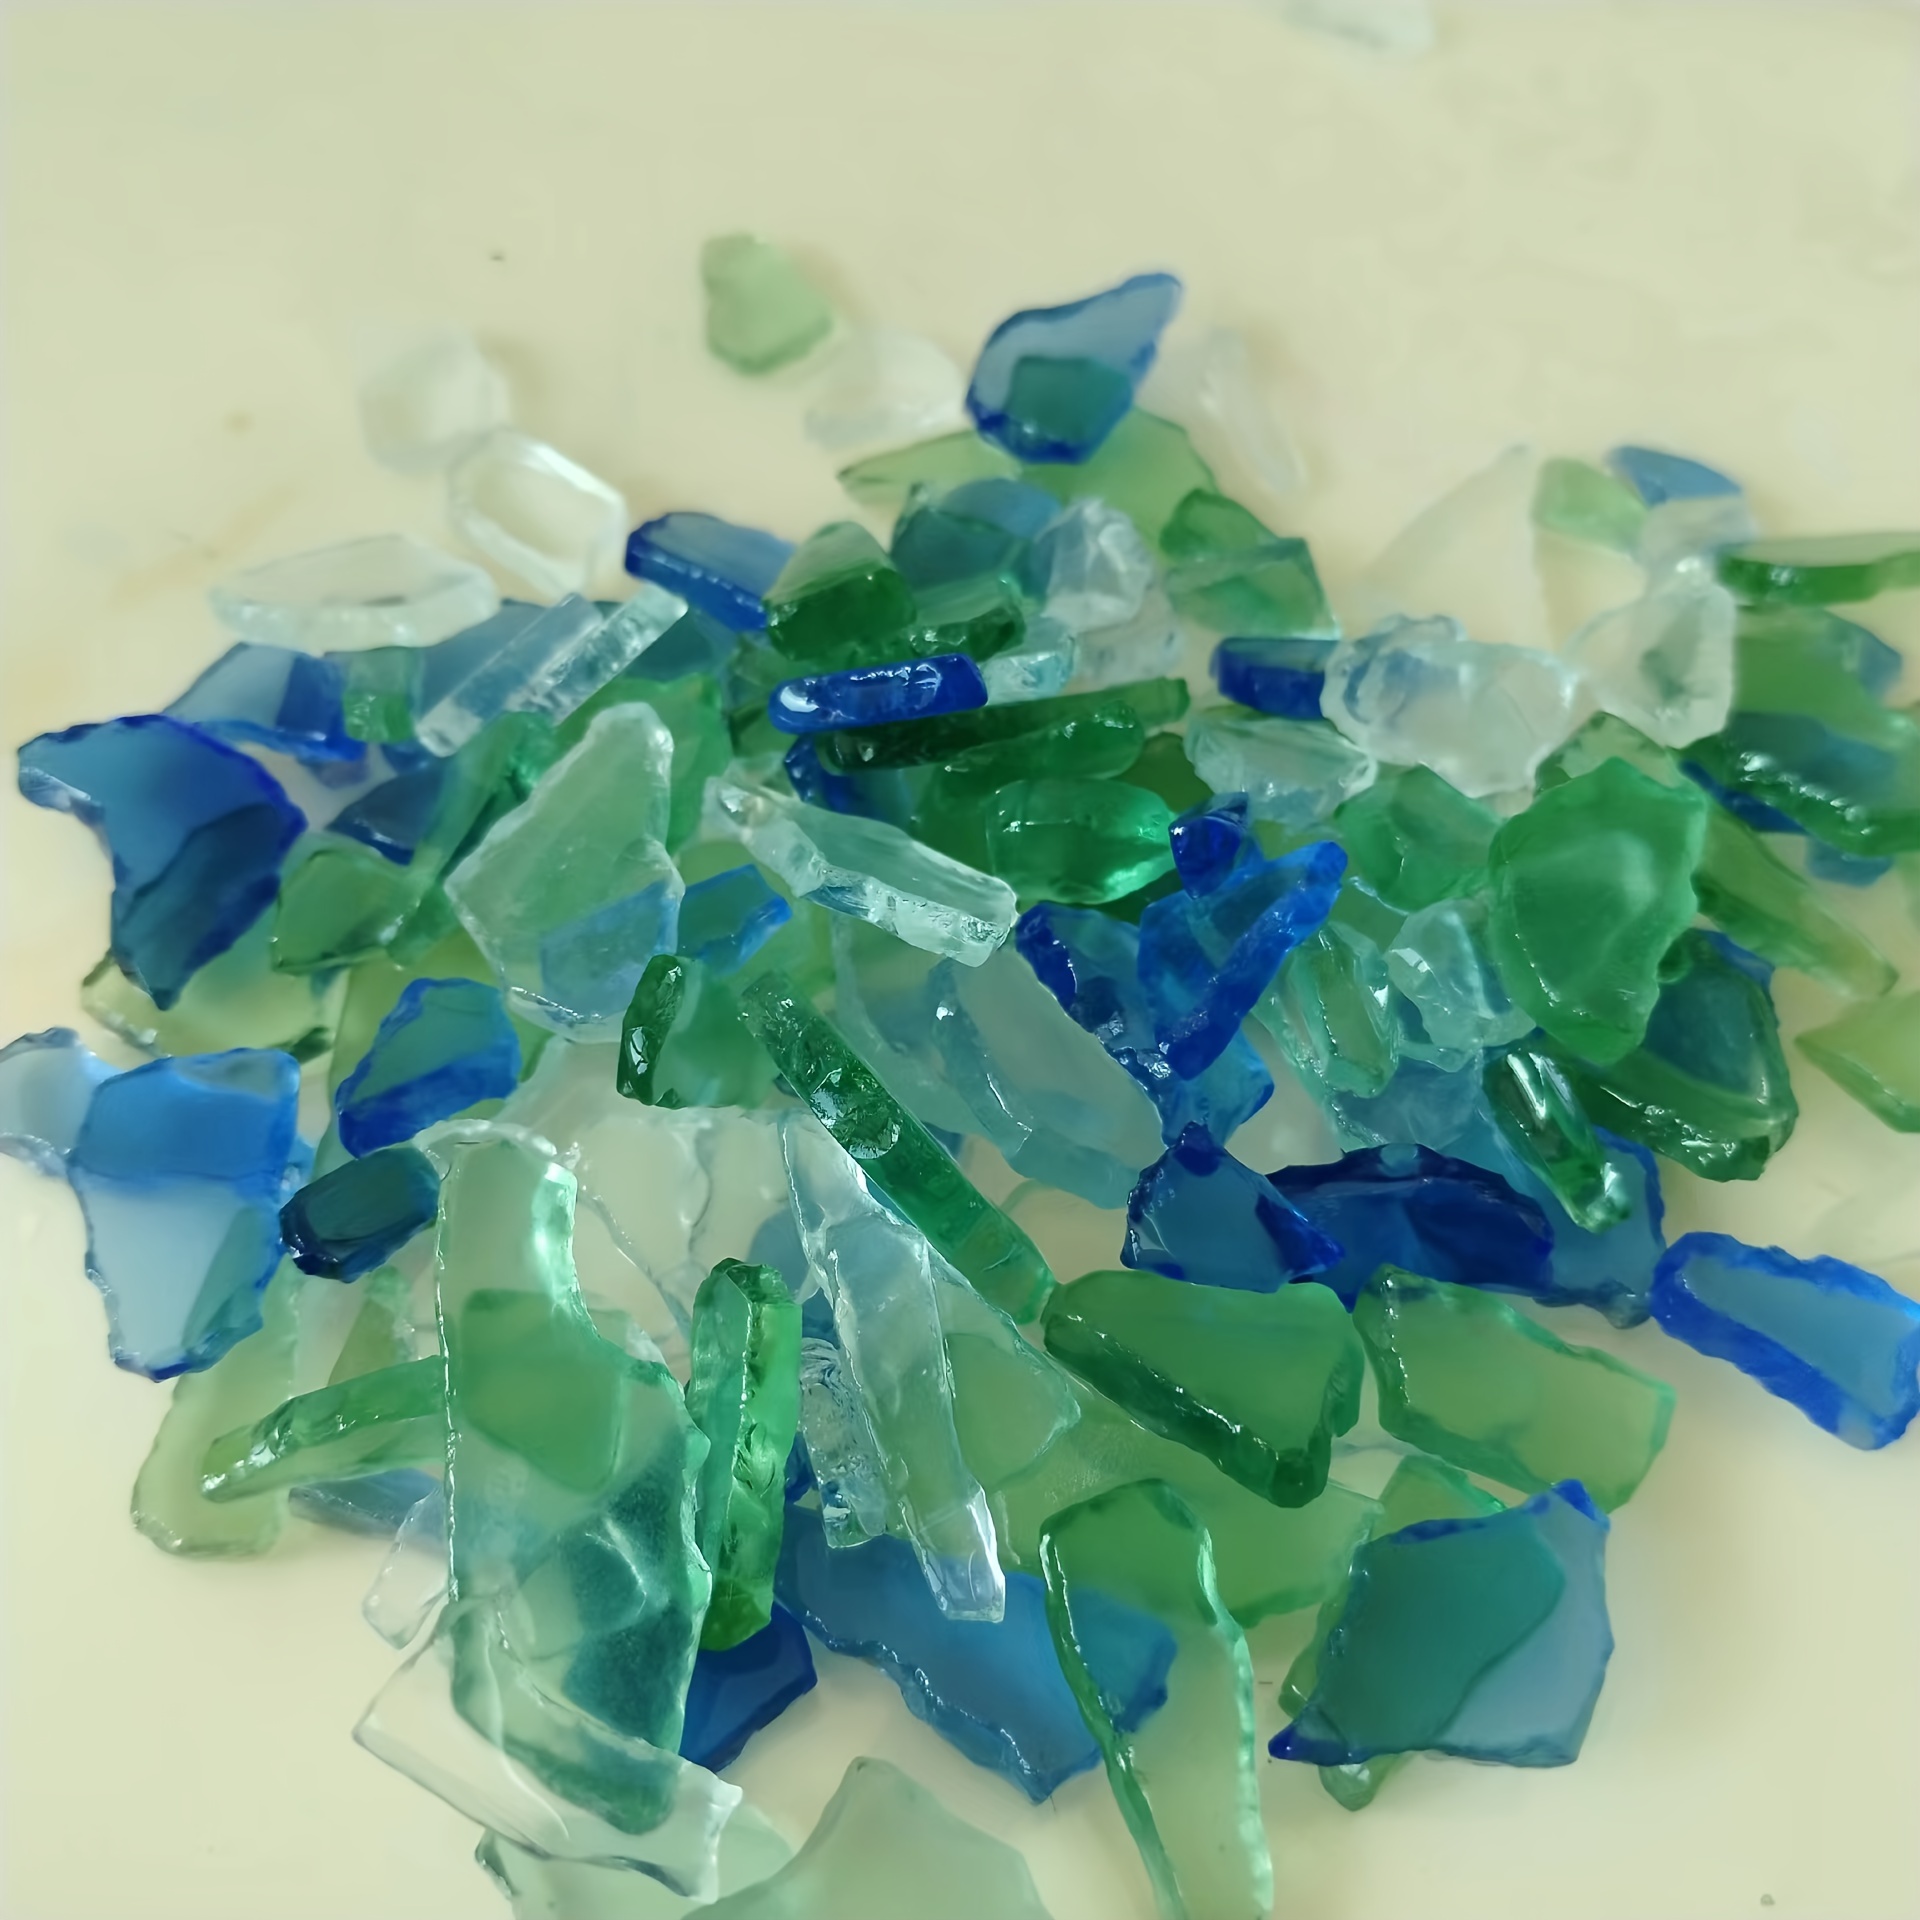 

300g/10.6oz Sea Glass For Crafts, Seaglass Pieces Decor Flat Frosted Sea Glass, Vase Filler, Crushed Sea Glass For Beach Wedding Party Decor Home Aquarium Decor Diy Art Craft Supplies (multicolor)